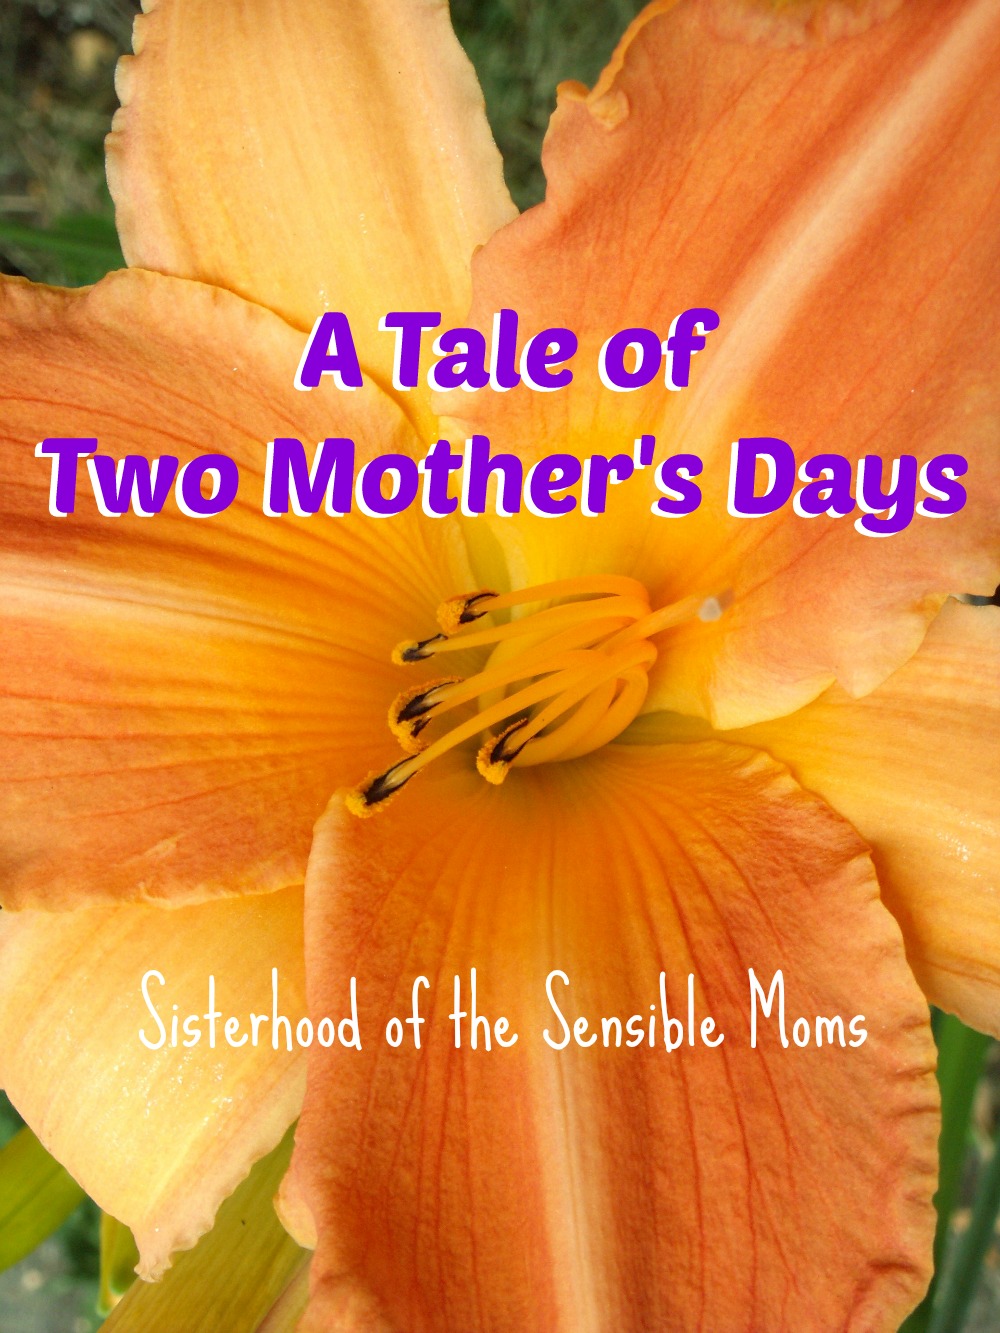  A Tale of Two Mother's Days: It's a flip of the coin on how your day will turn out. |Parenting| Sisterhood of the Sensible Moms